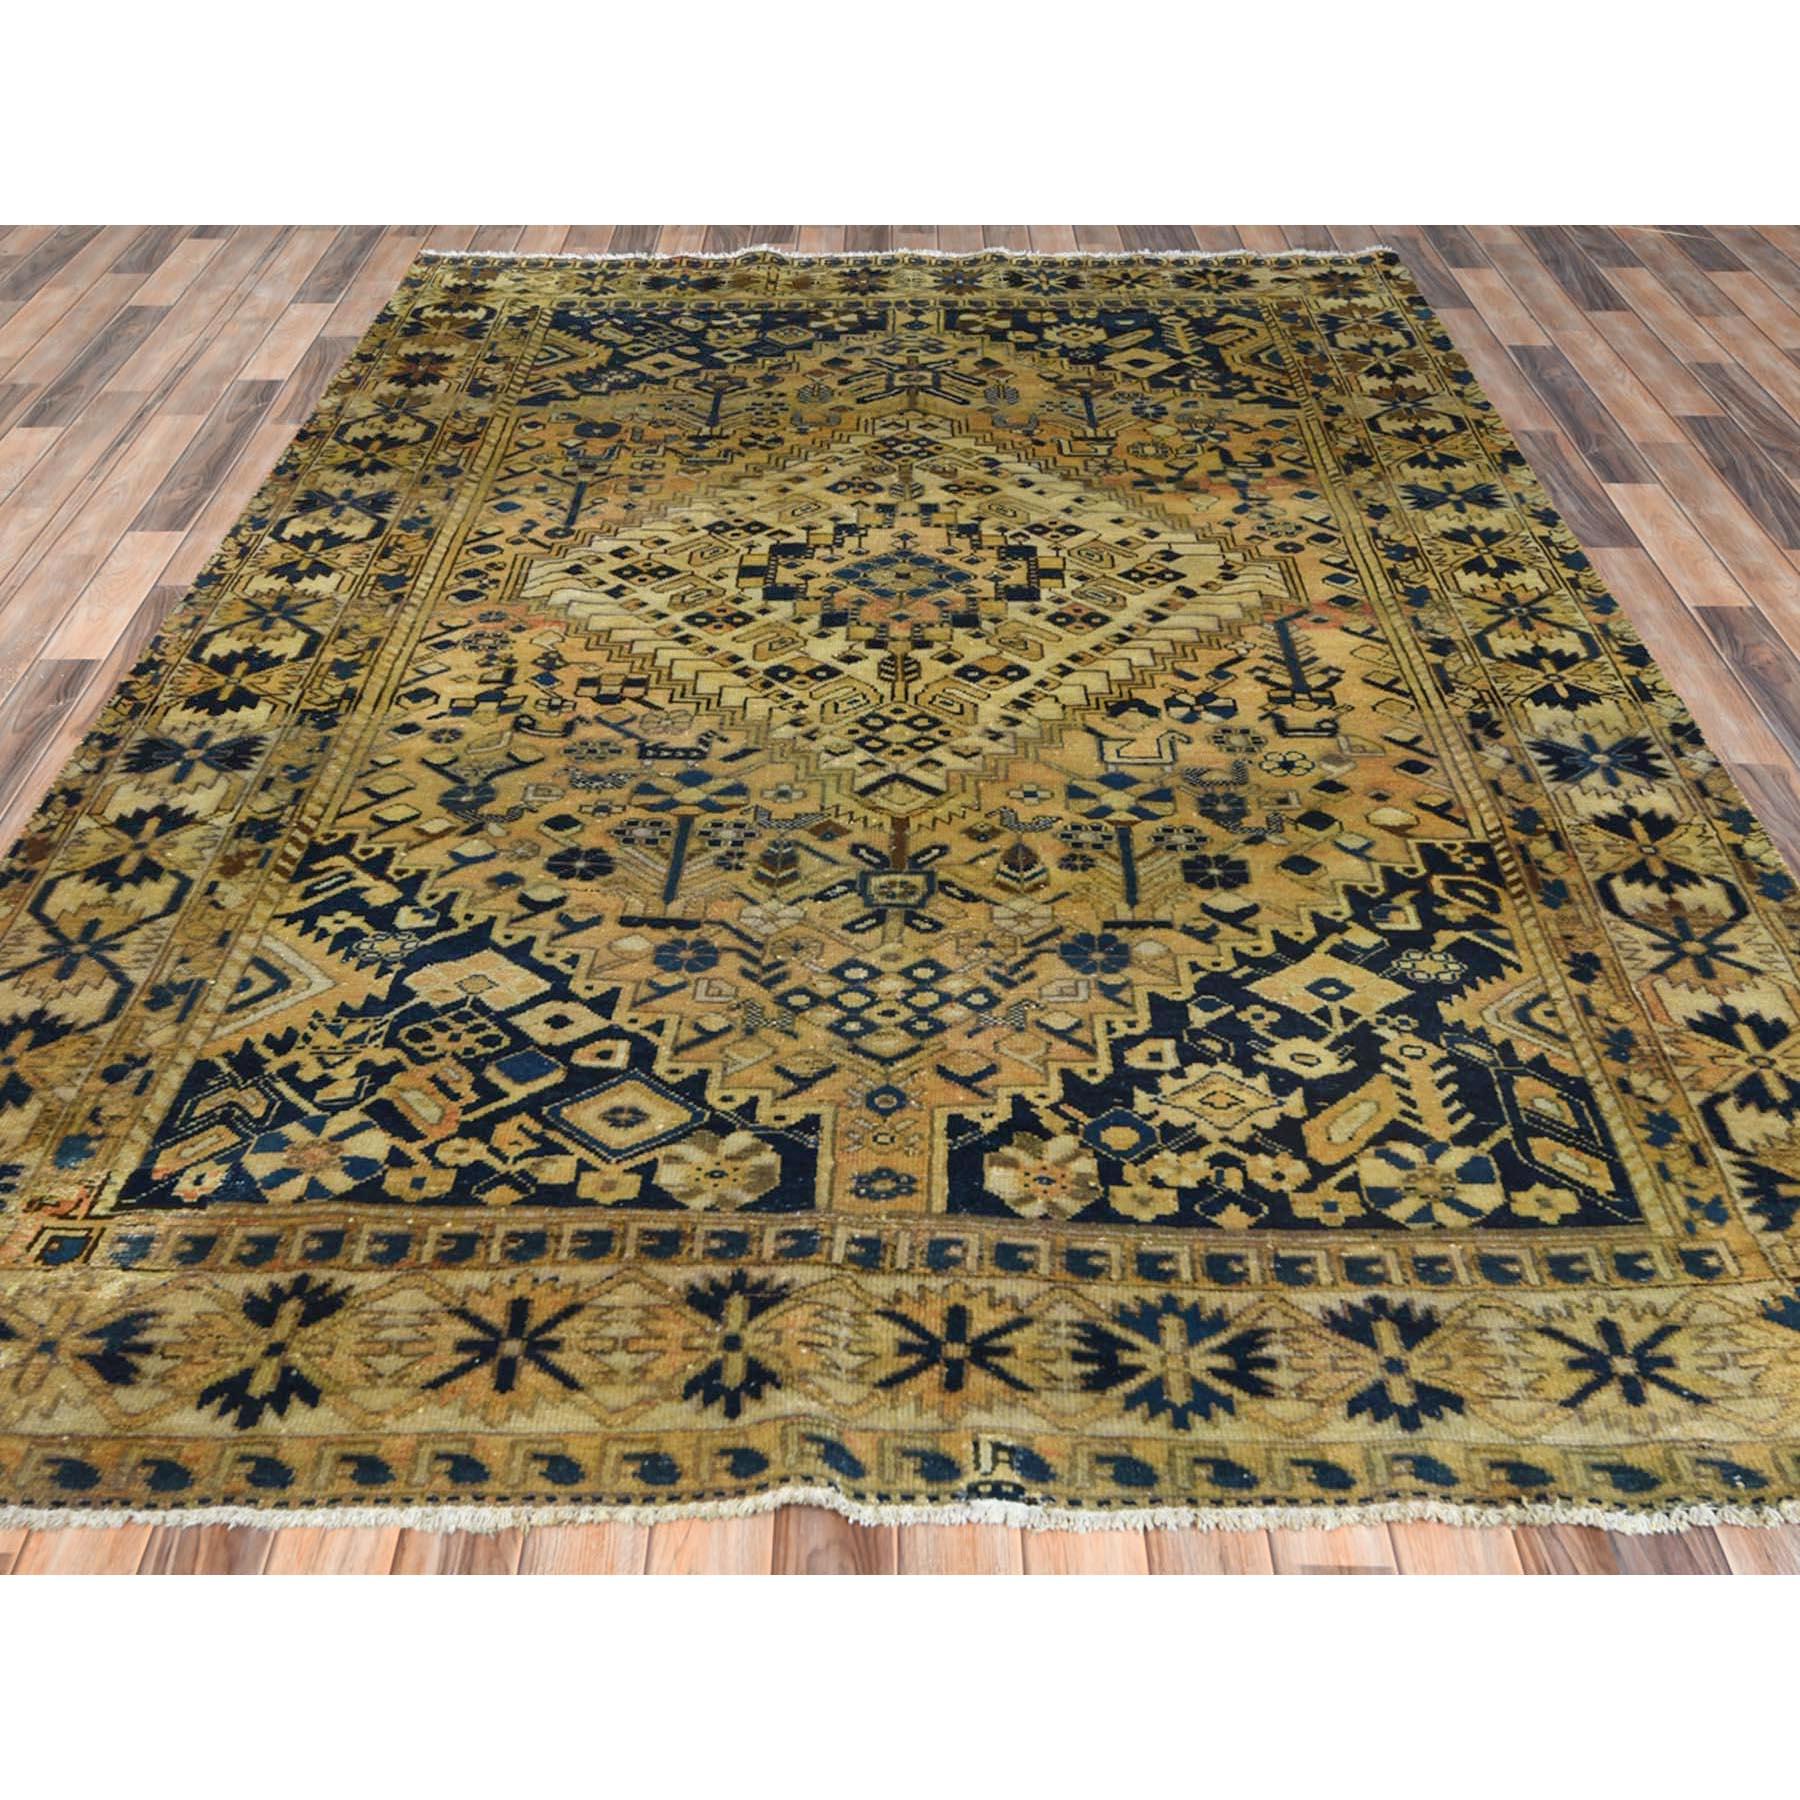 Medieval Gold Color, Vintage Persian Bakhtiar, Distressed Look Worn Wool Hand Knotted Rug